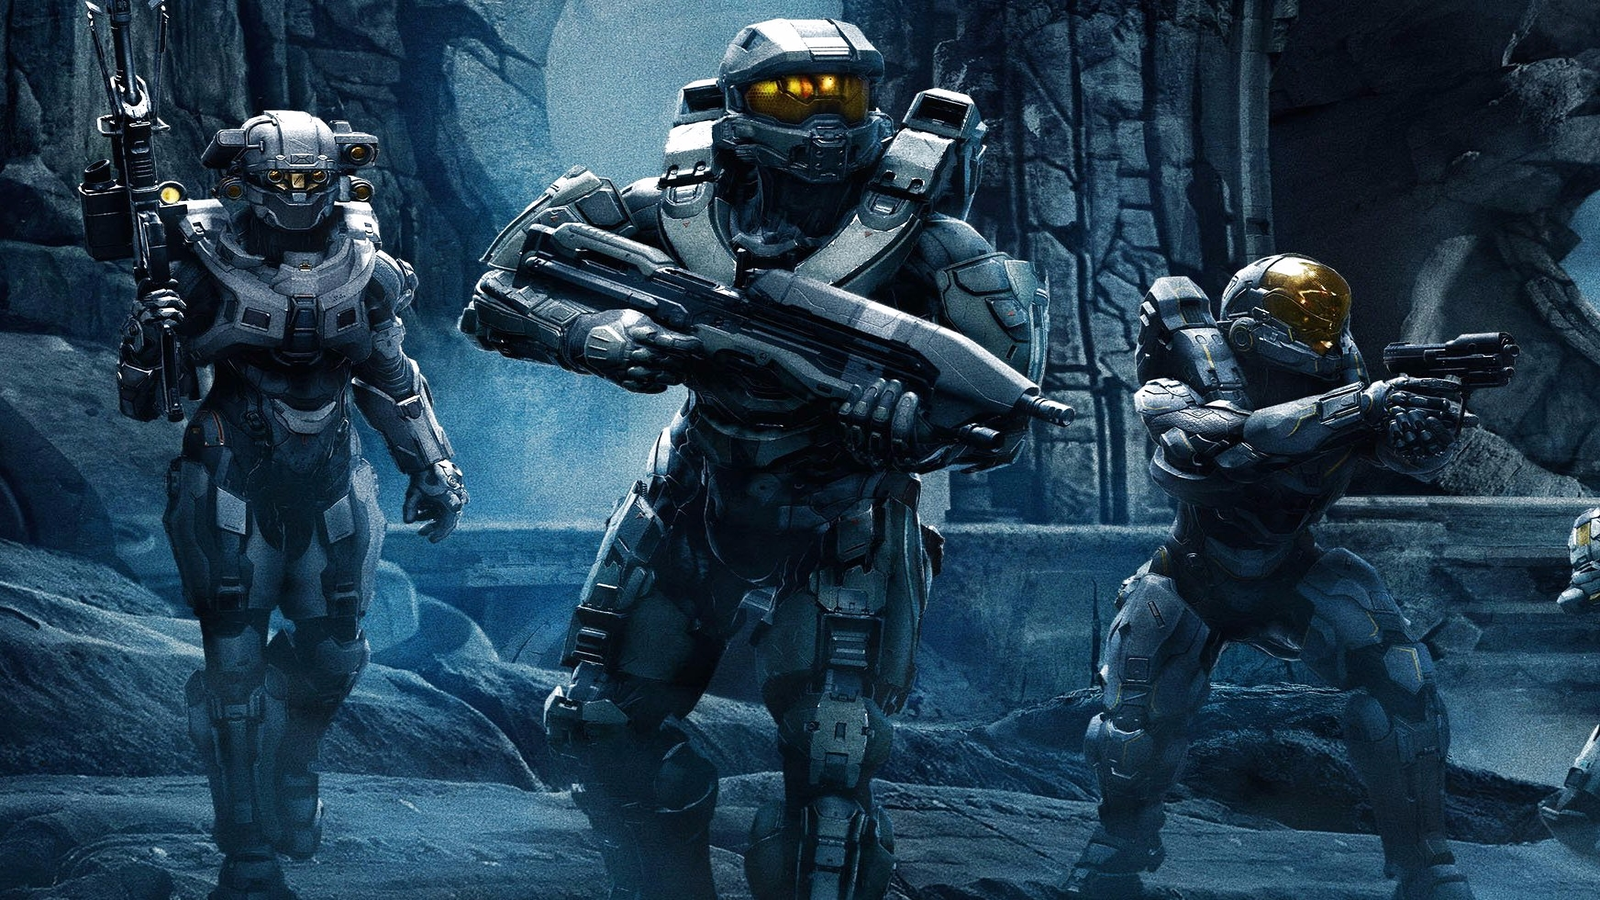 Halo 4 promises big year for Xbox (images) - CNET